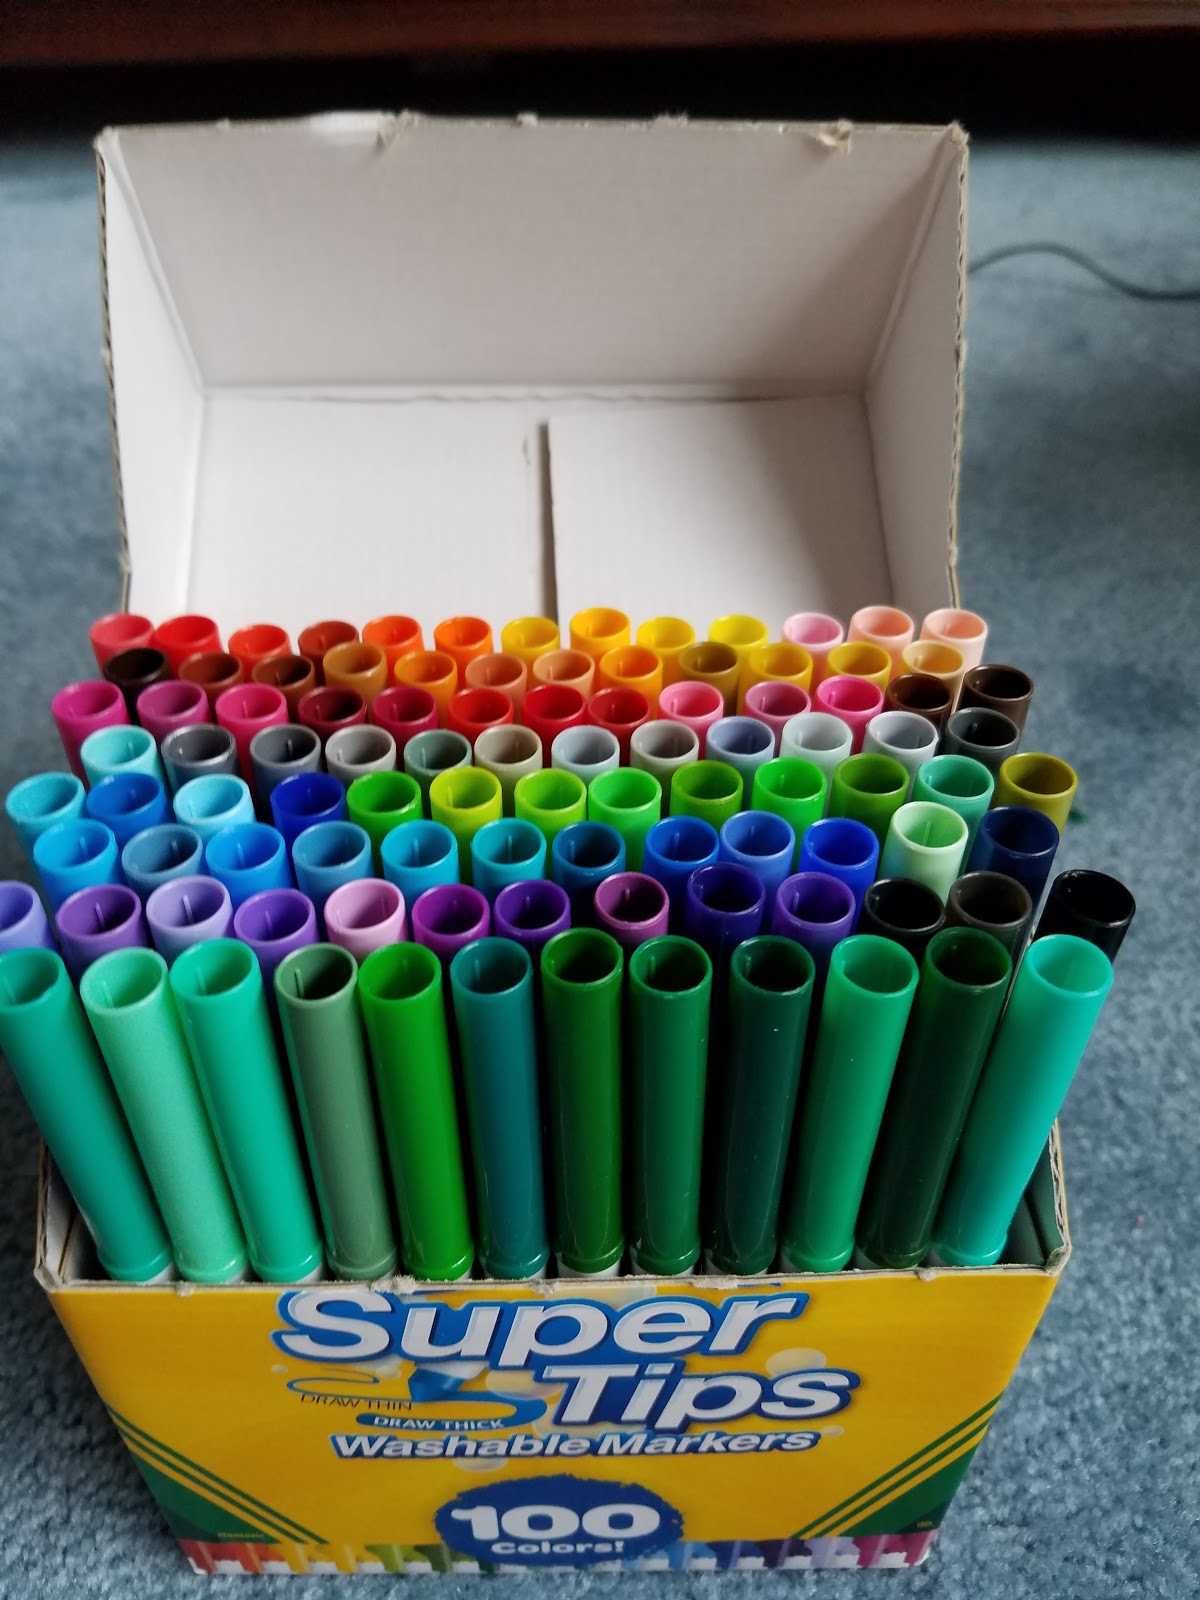 100 Count Crayola SuperTips Washable Markers: What's Inside the Box